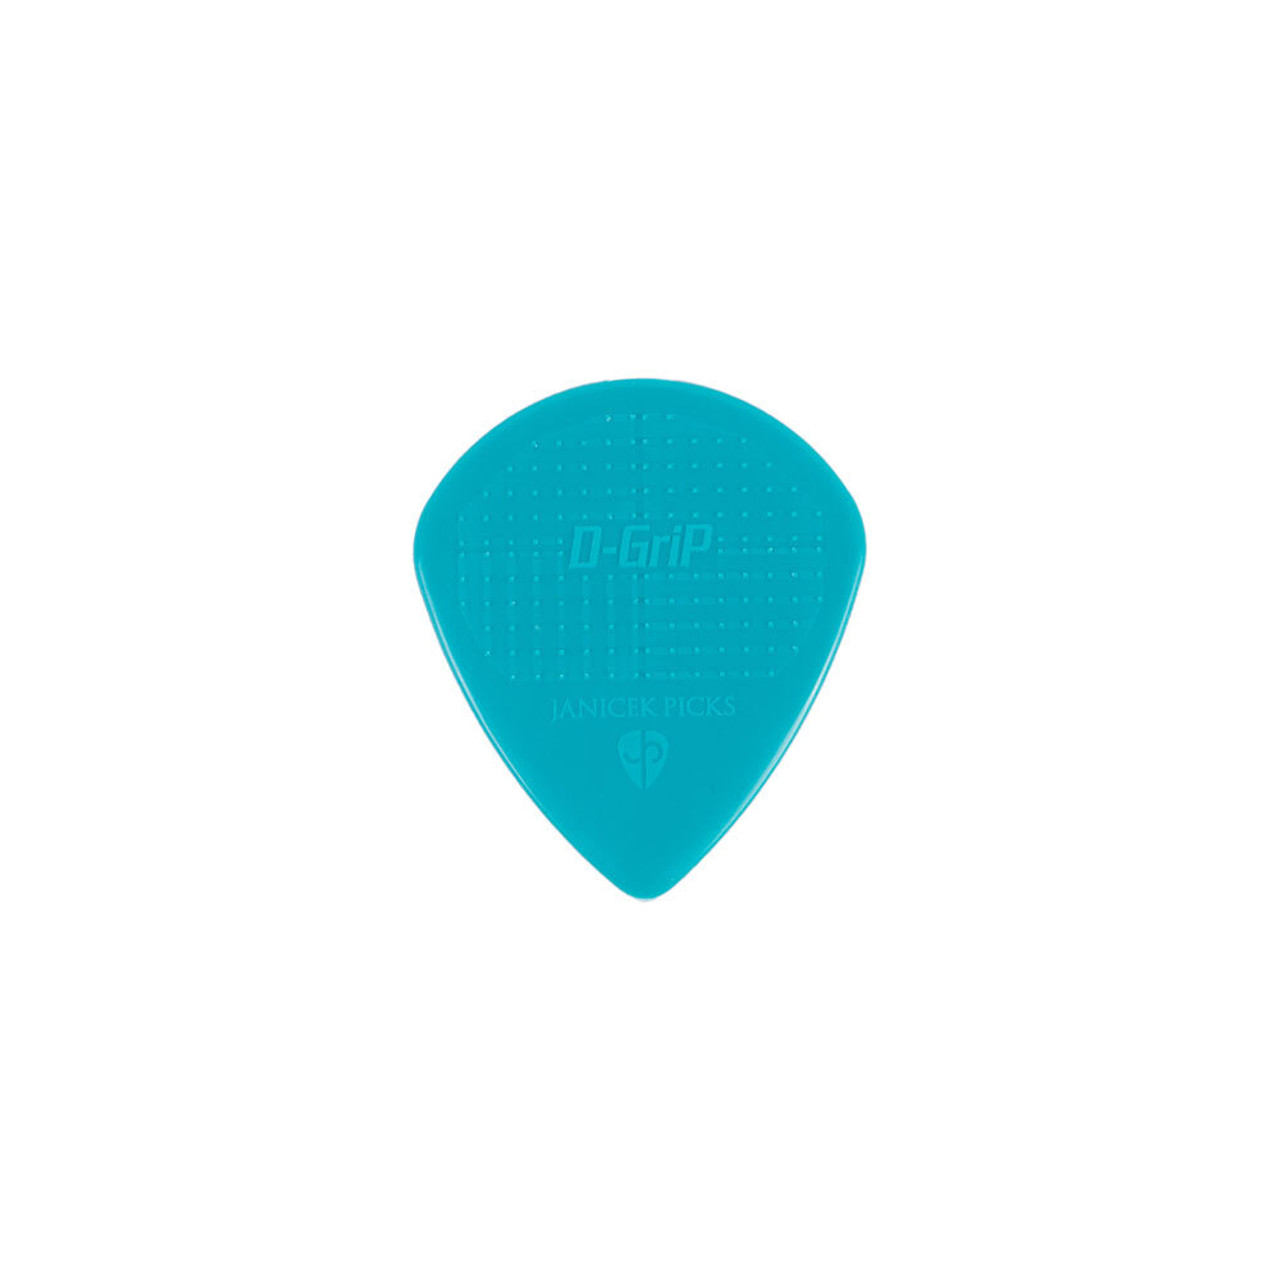 Janicek D-Grip Jazz-A Series Pick in Turquoise (0.88mm) -36pk